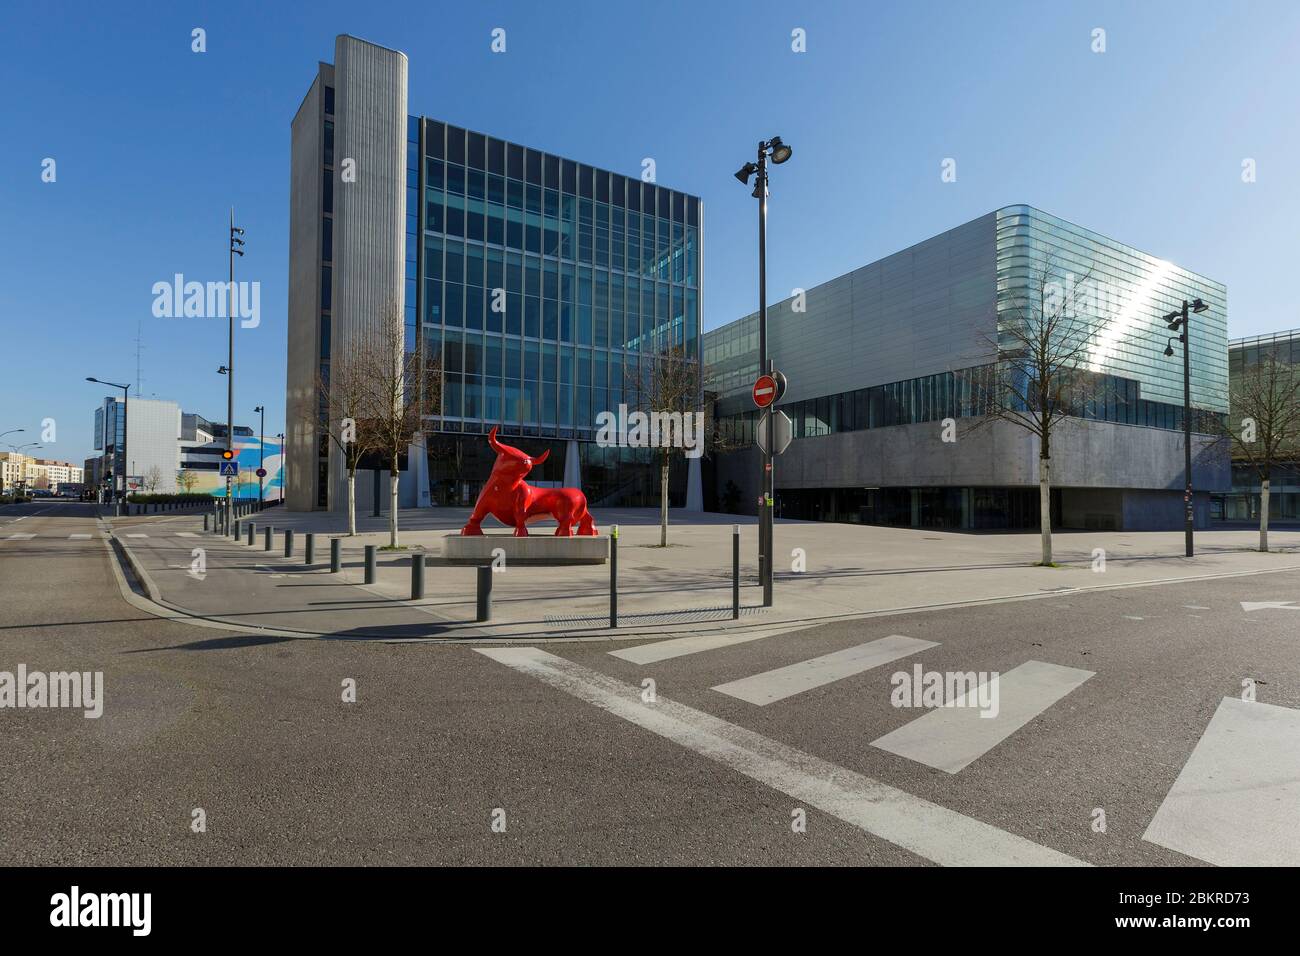 France, Meurthe et Moselle, Nancy, Covid 19 or Coronavirus lockdown, Nancy Gare area, sculpture called Le Taureau (The Bull) by Ge Pellini in front of the Centre des Congres Jean Prouve as part of the ADN (Art Dans Nancy) project Stock Photo